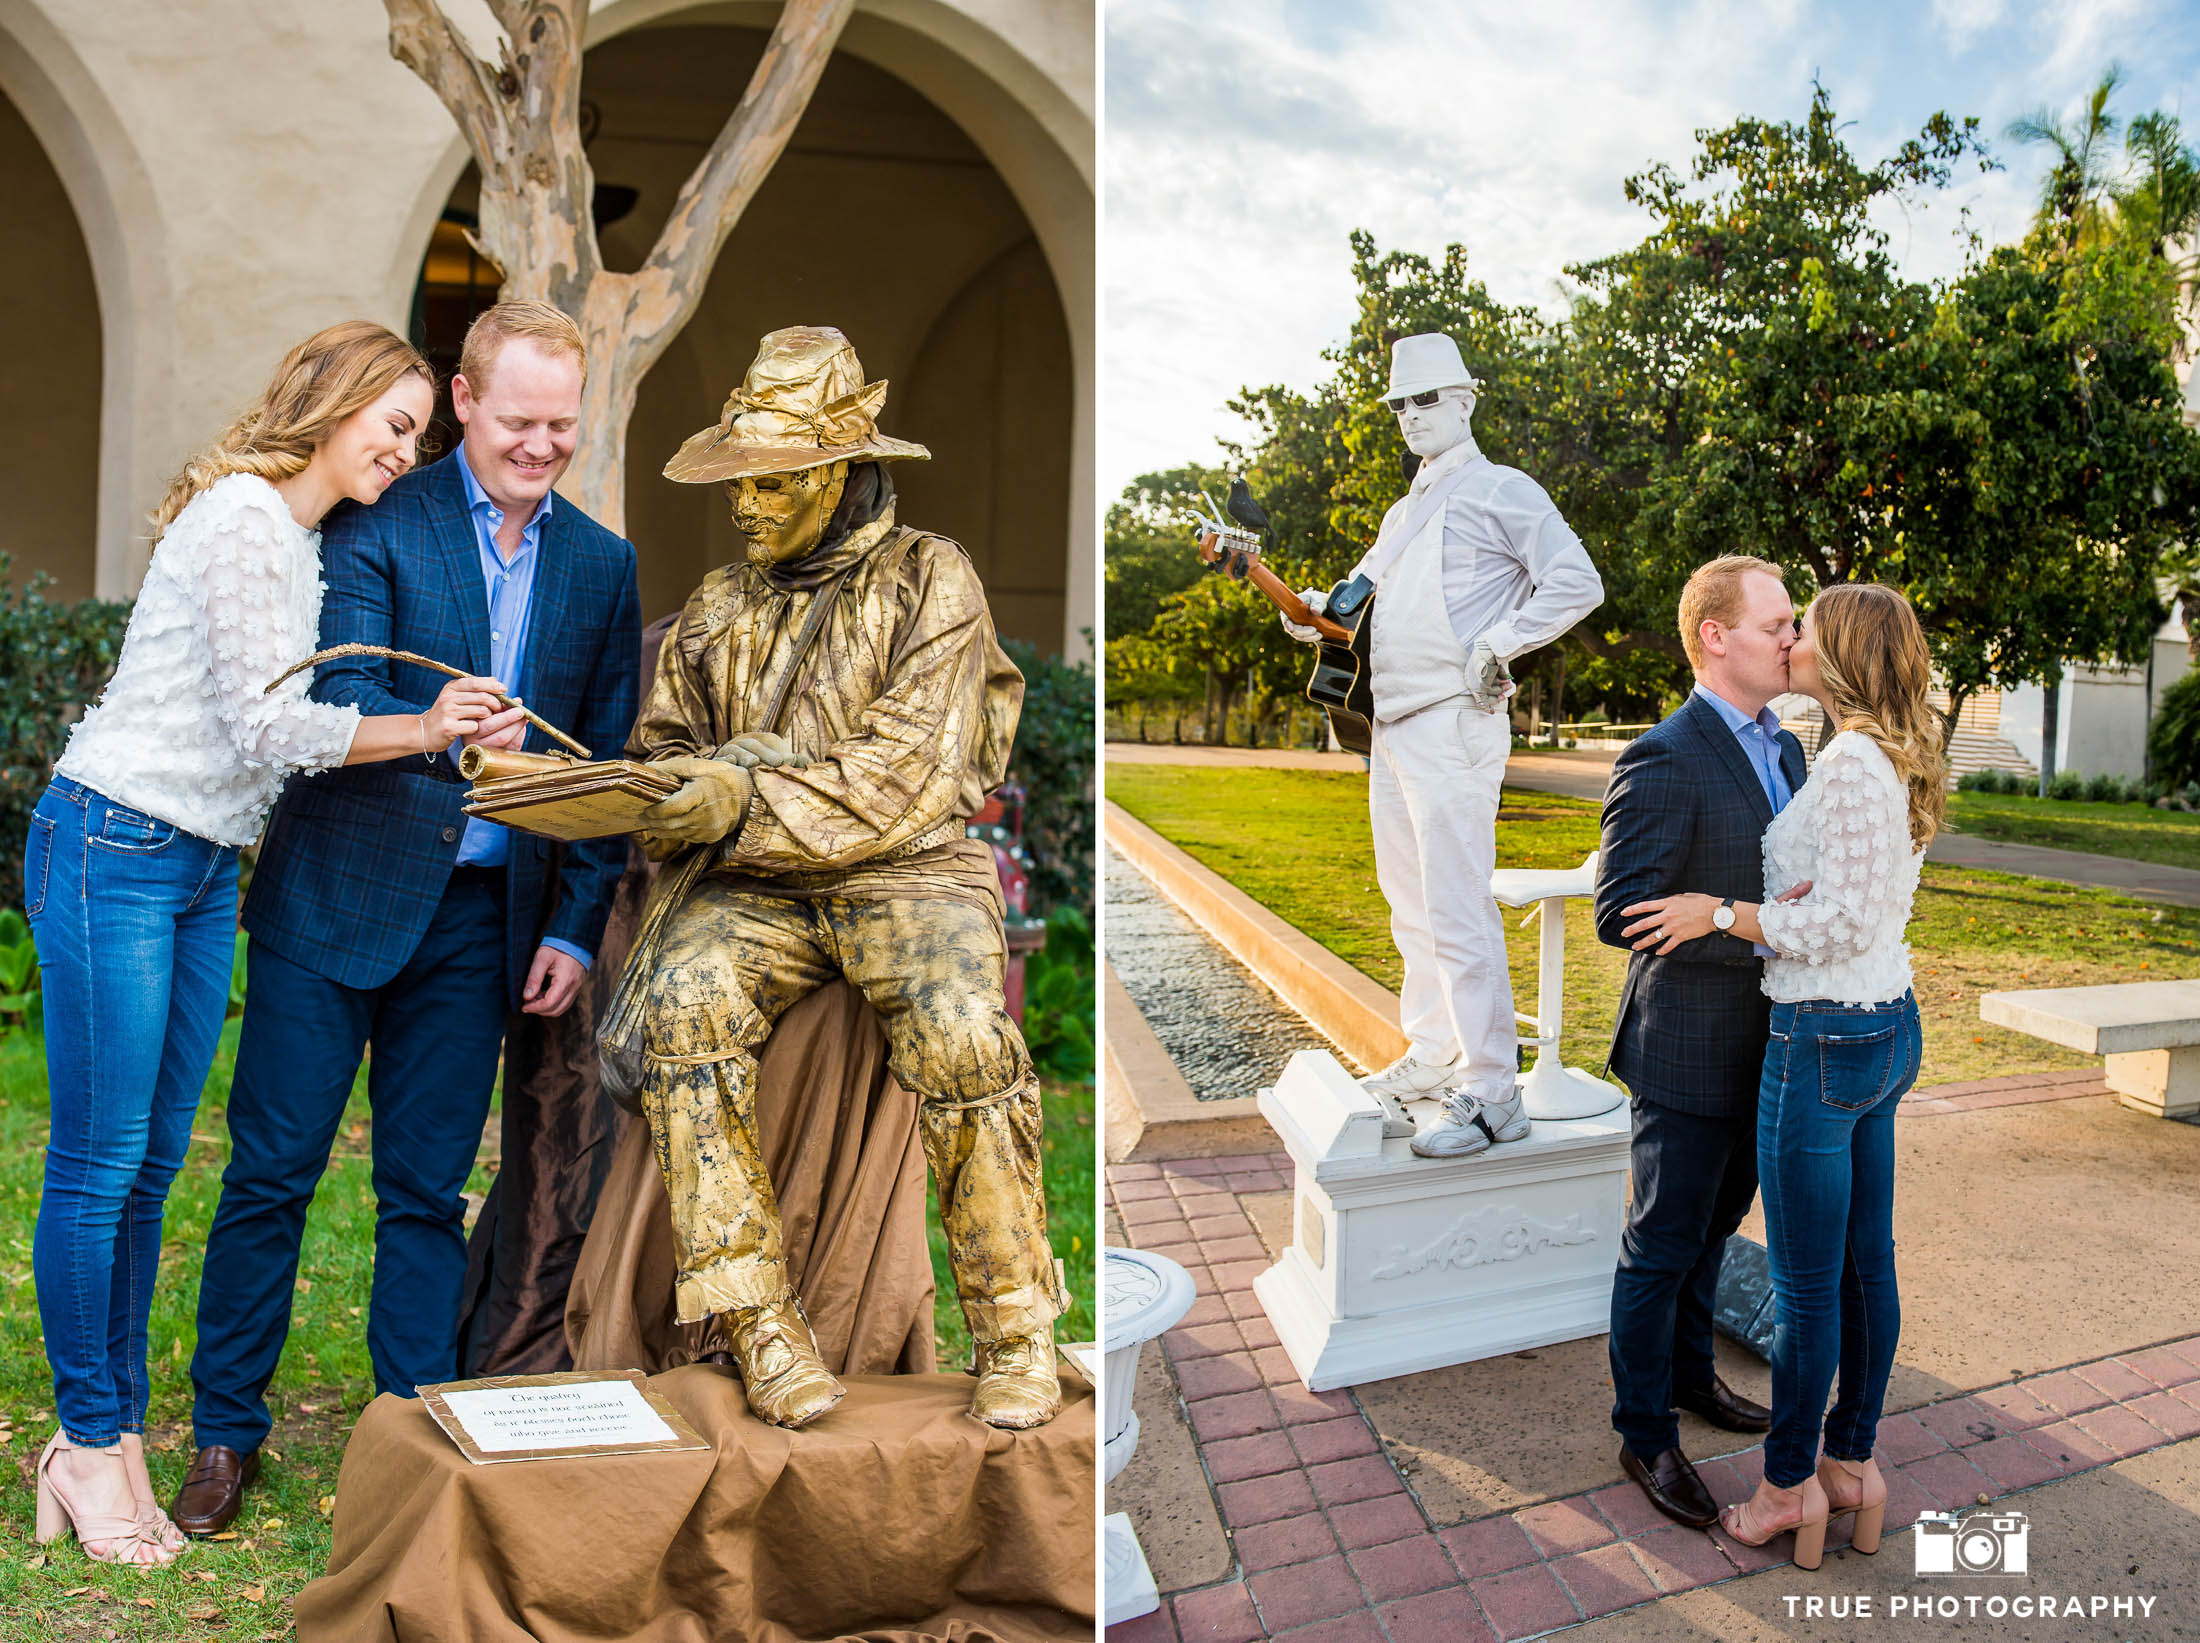 Engaged couple laugh and kiss while interacting with living statue street performers